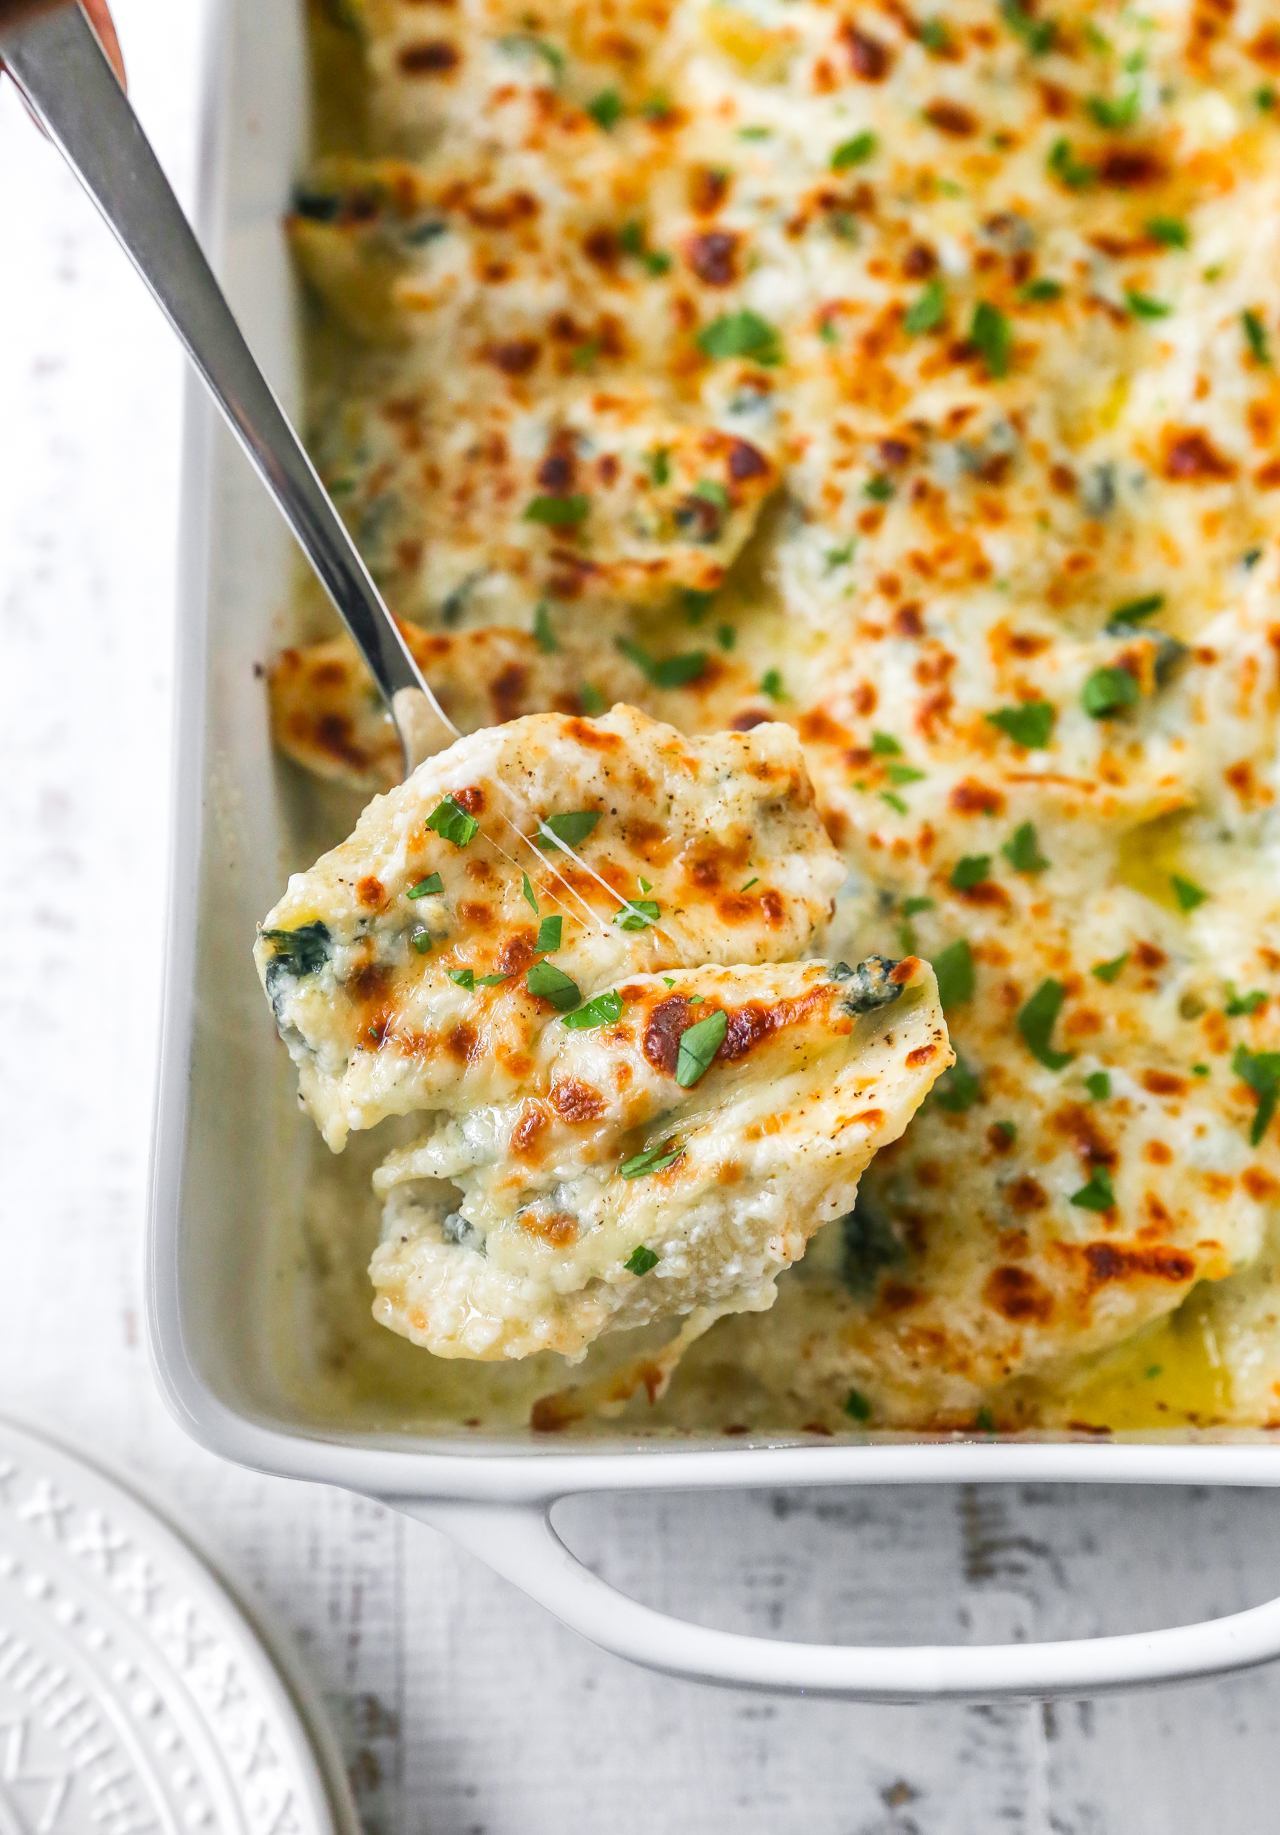 Spinach & Artichoke Stuffed Shells with Asiago Cream - Yes to Yolks